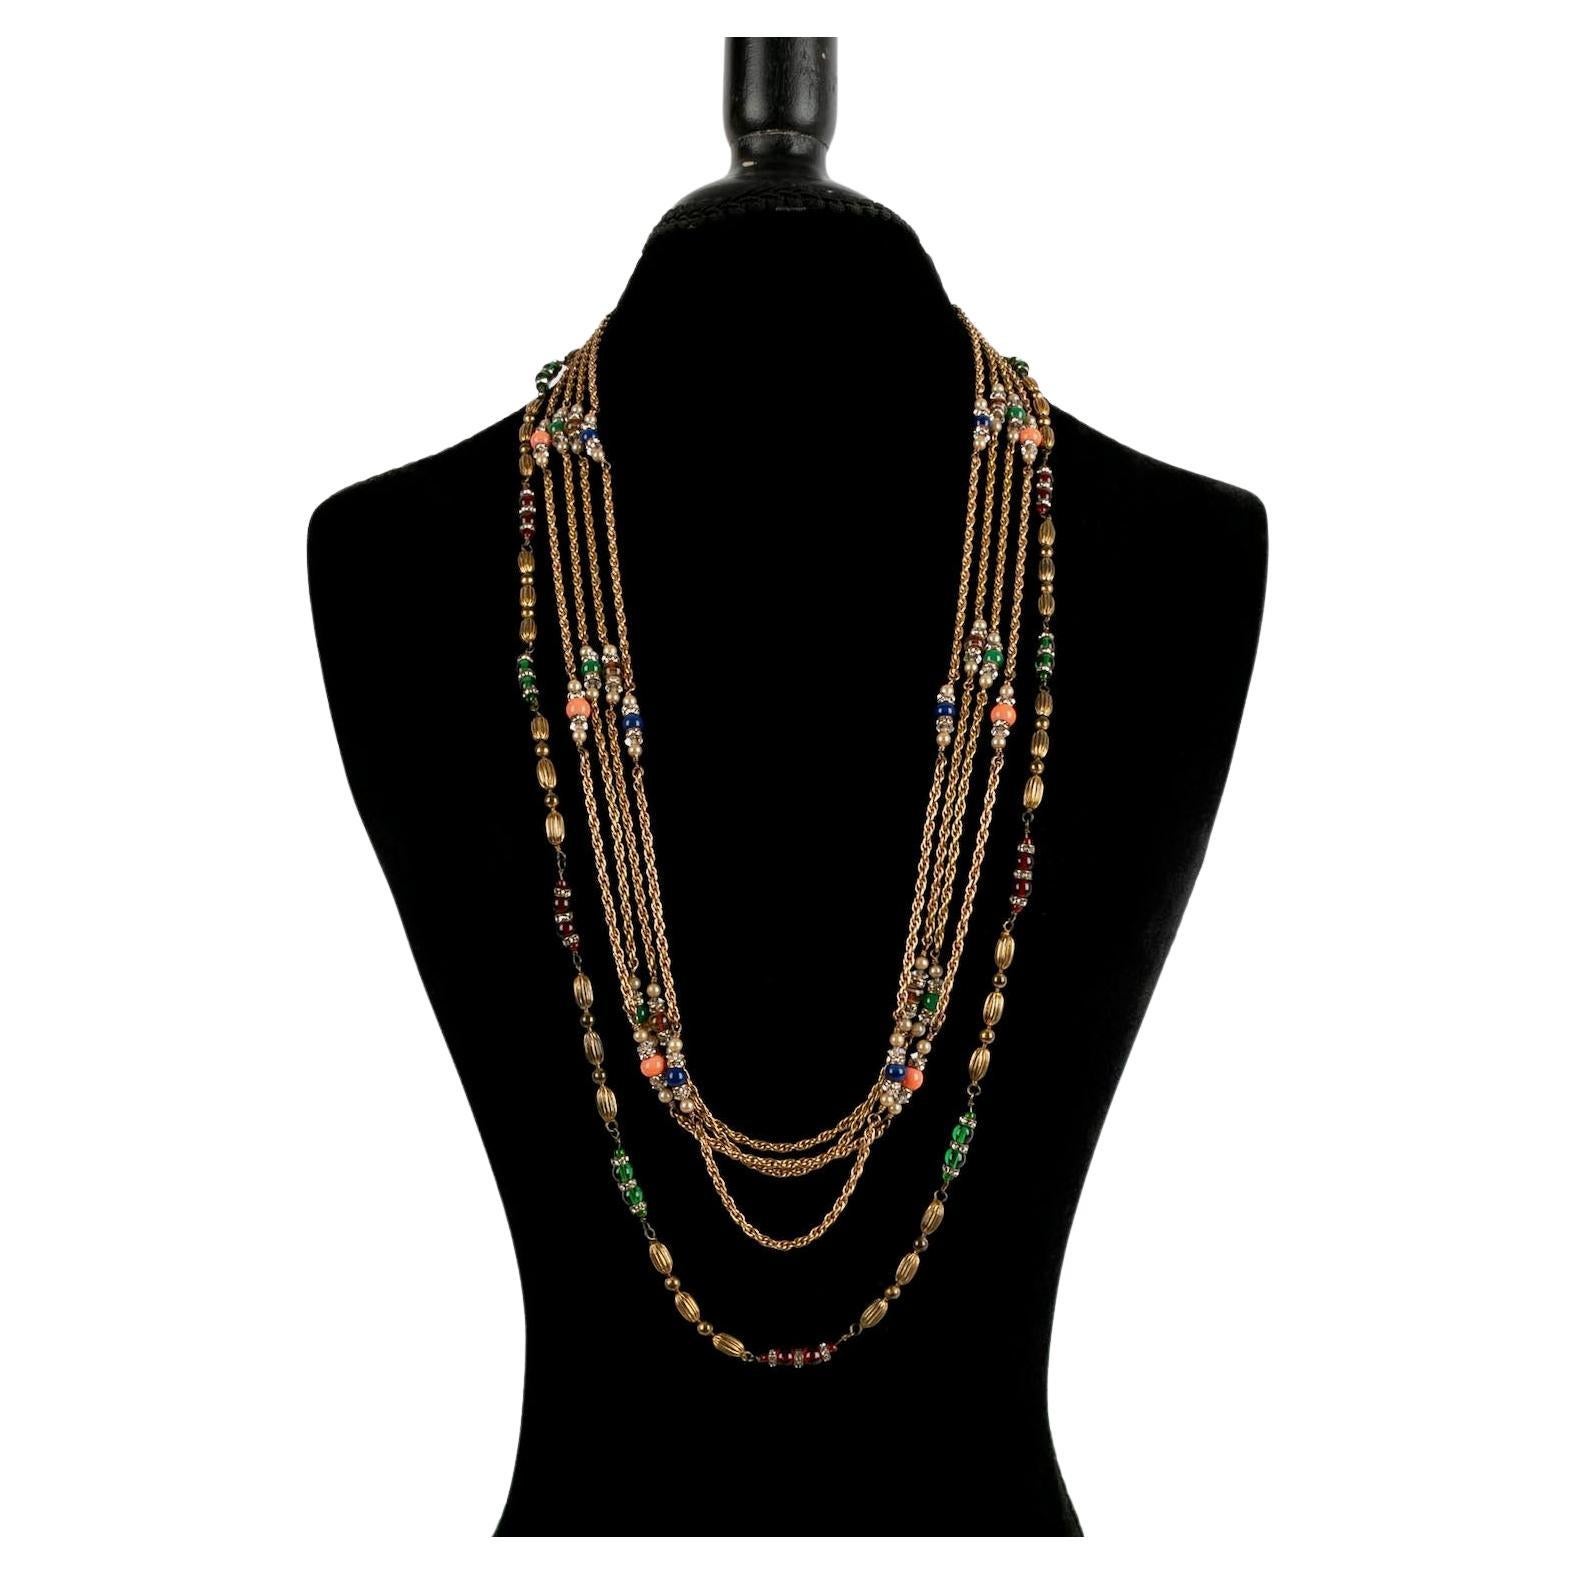 Chanel Set of Vintage Long Necklaces in Gold Metal and Glass Beads